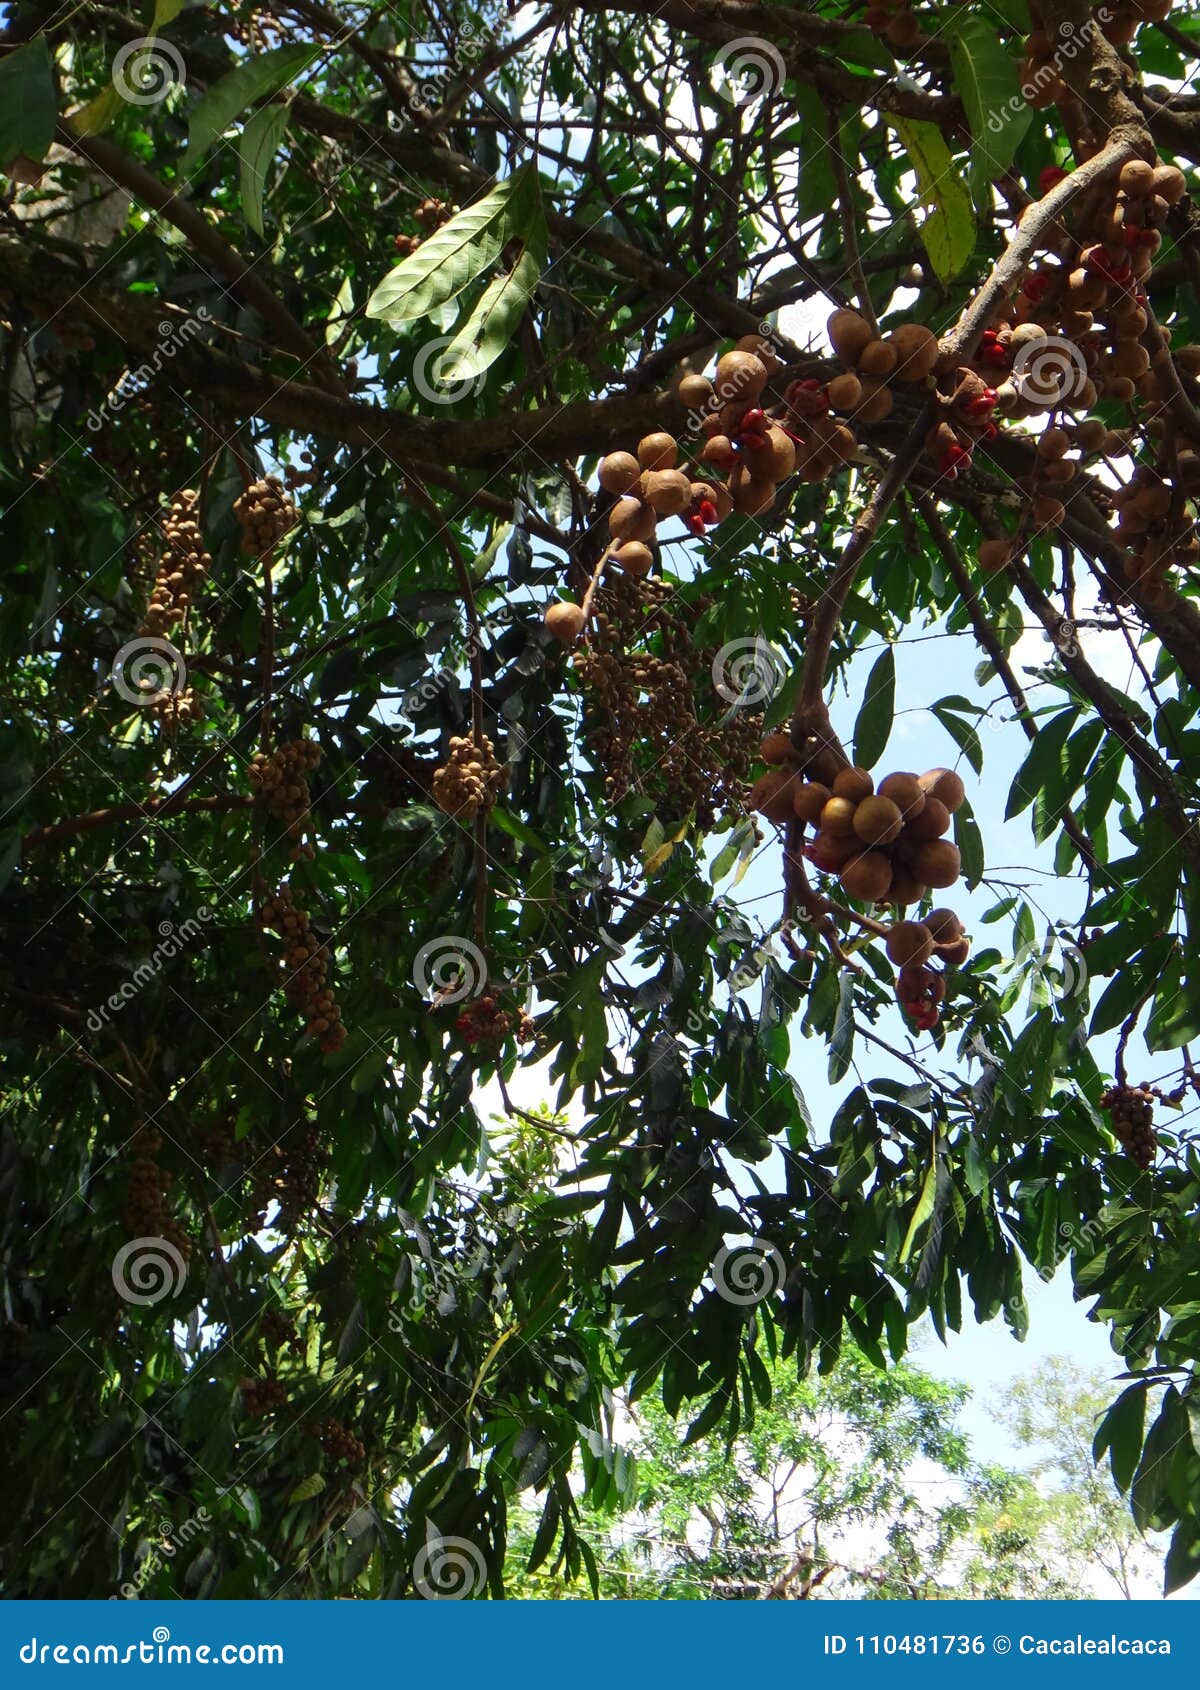 american muskwood branches with capsules and seeds